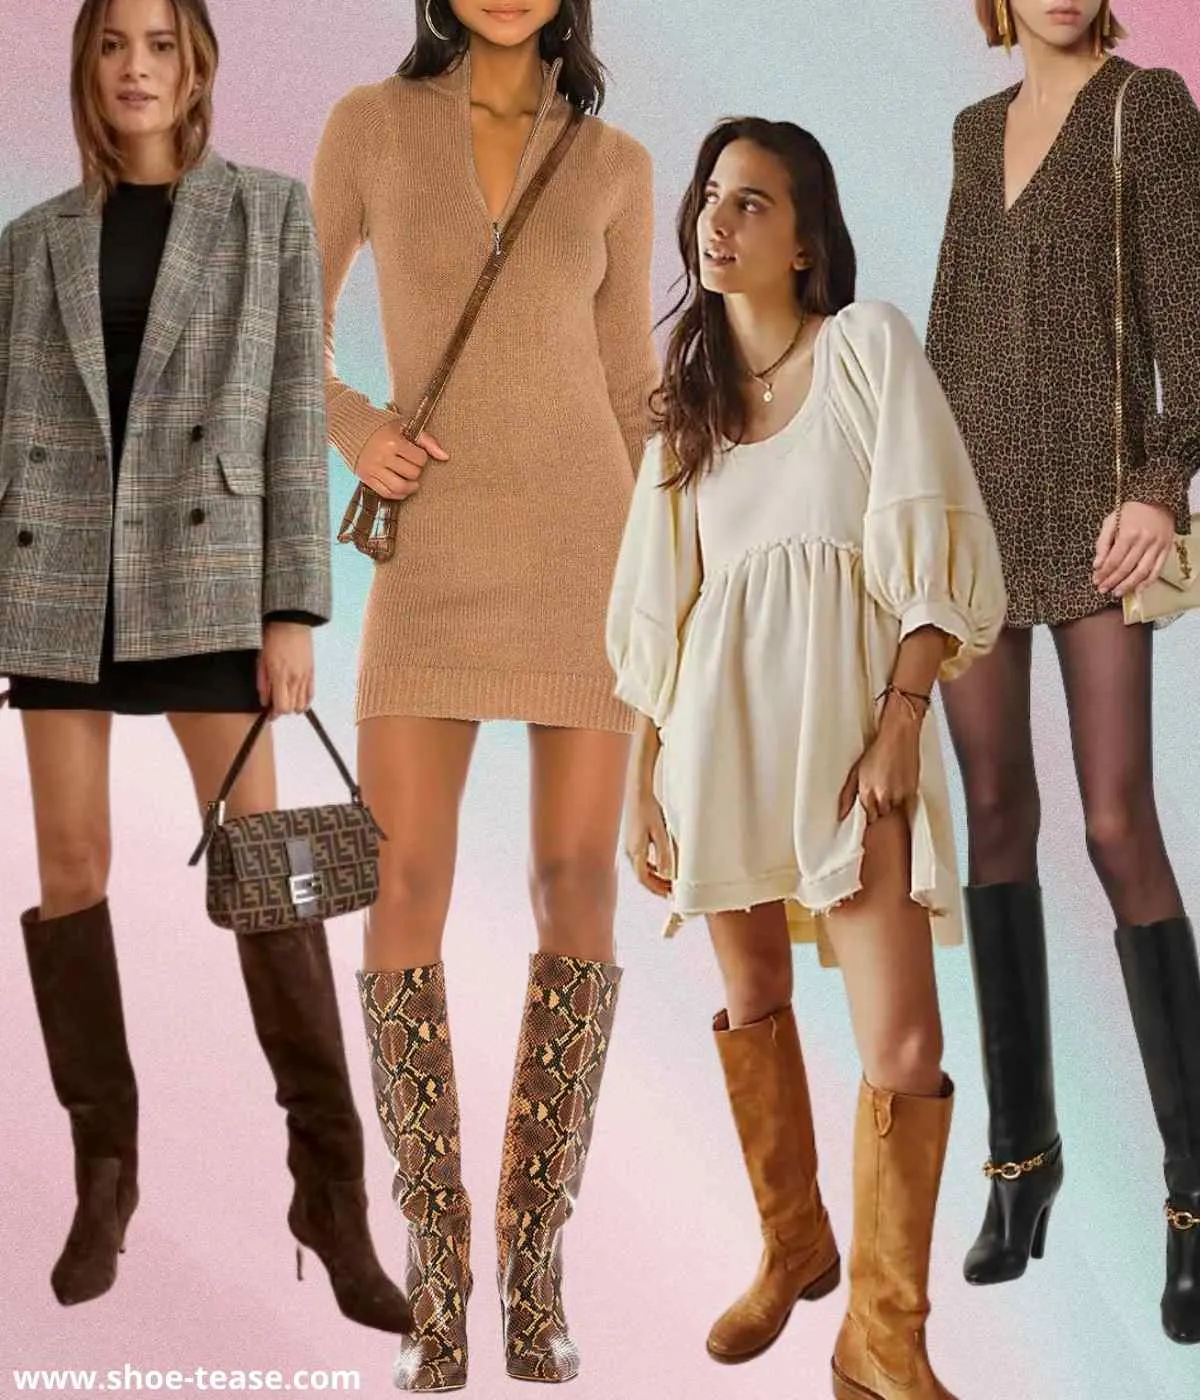 4 women wearing different mini dresses with knee boots.